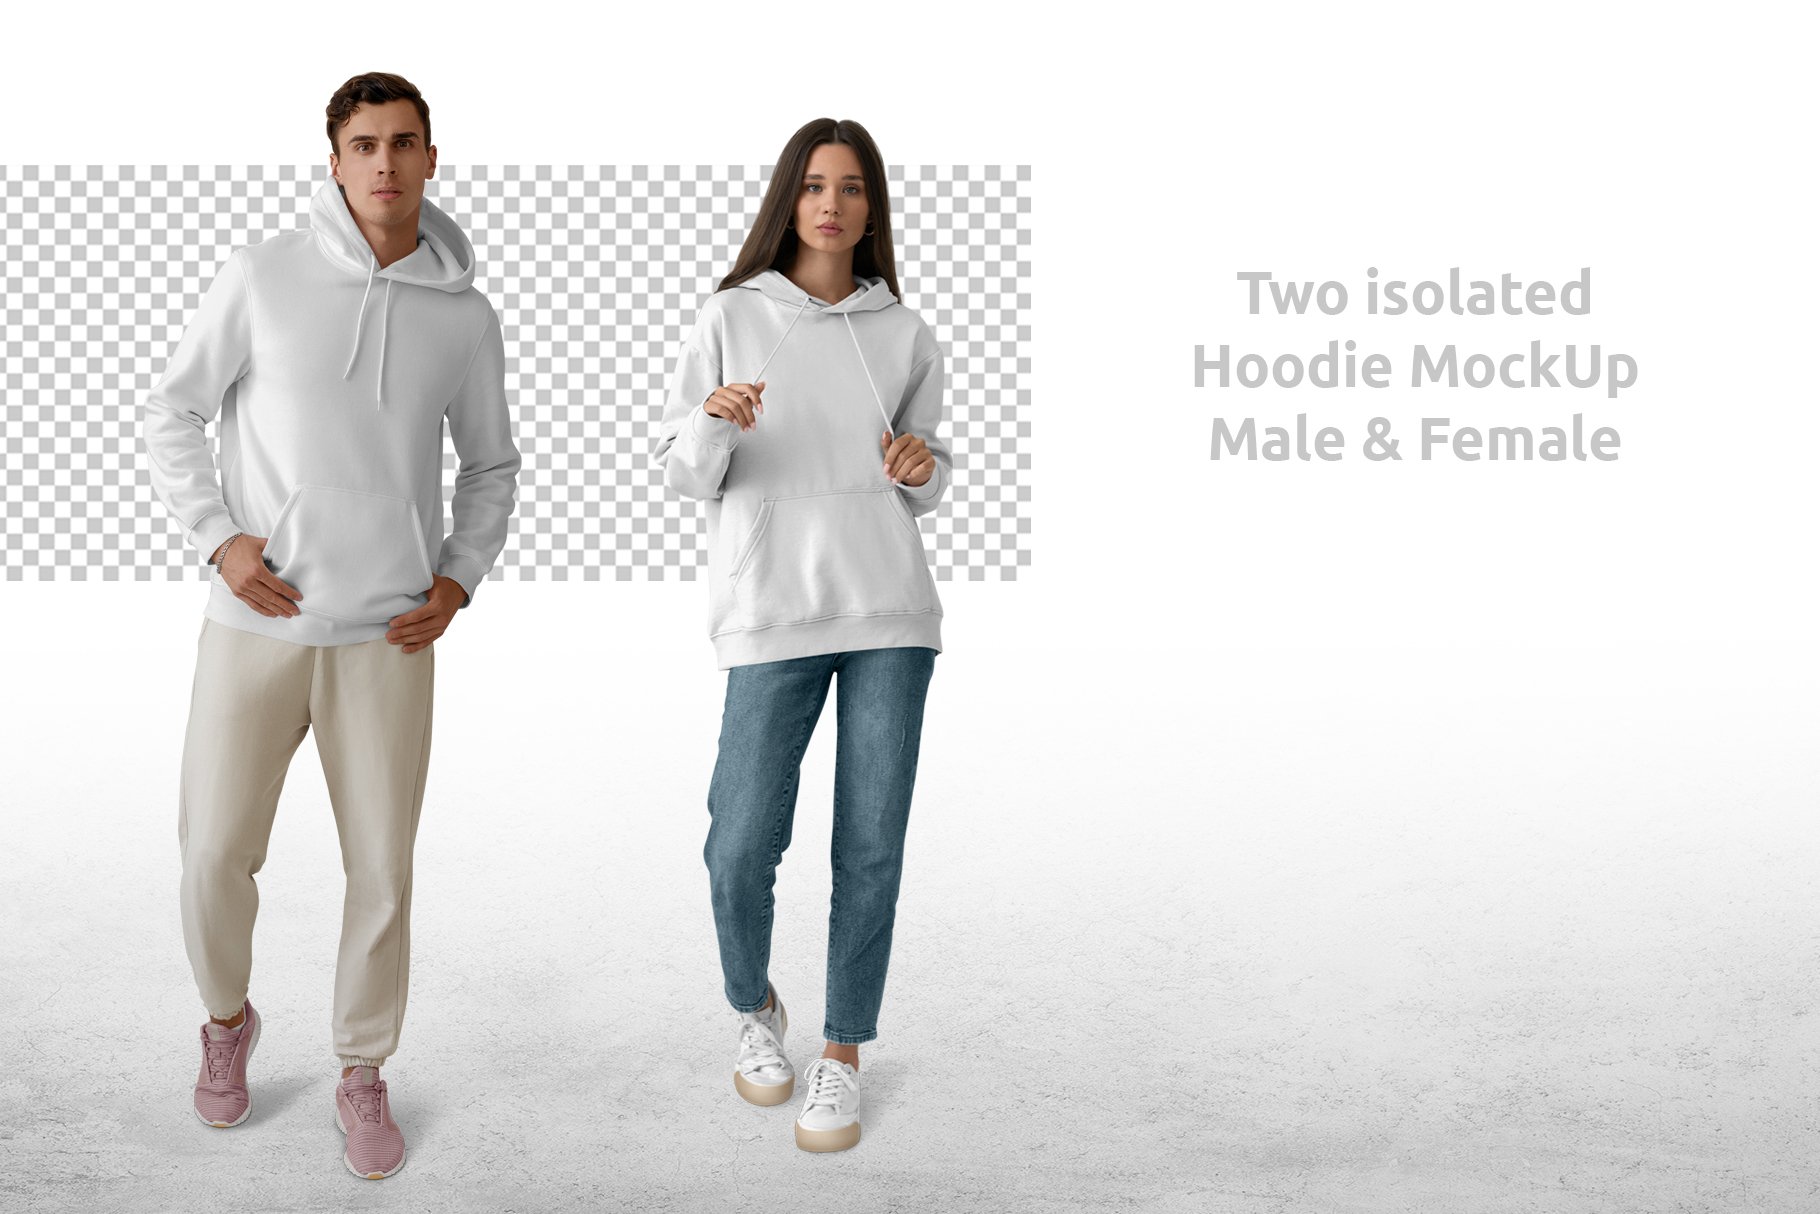 Male & female low isolated hoodie mockup.